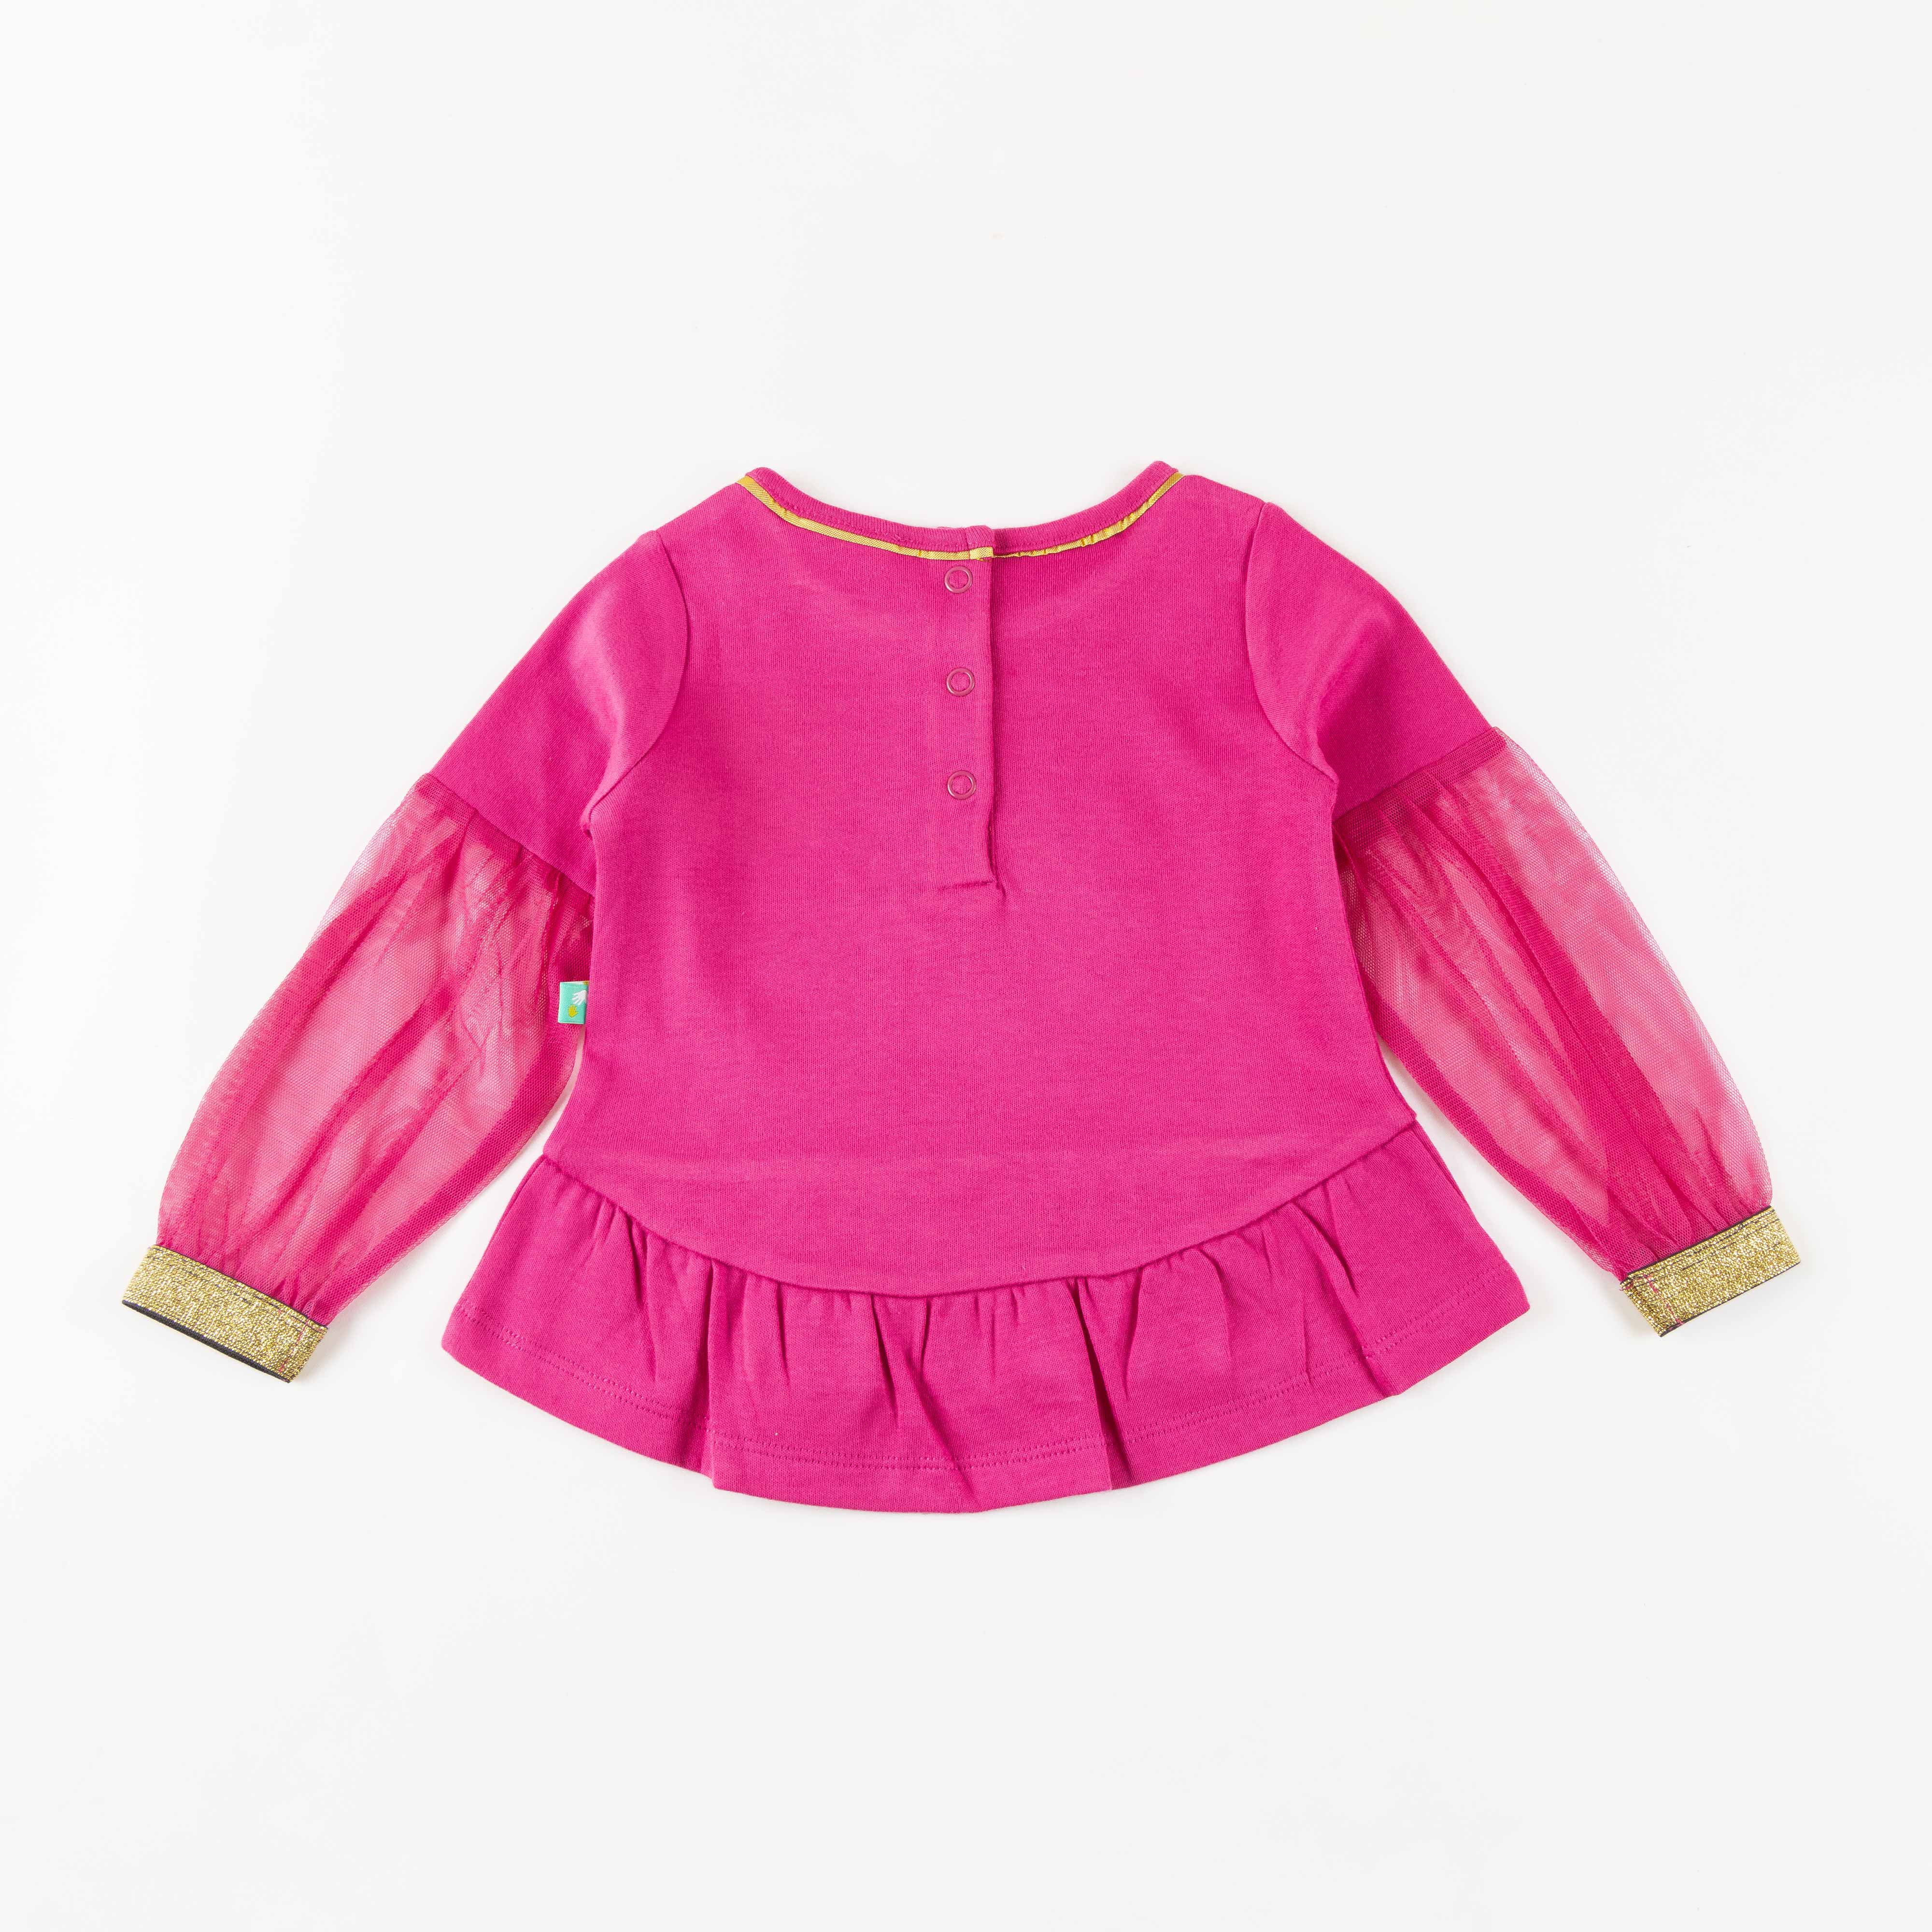 Girls Full Sleeve Embroidery Top